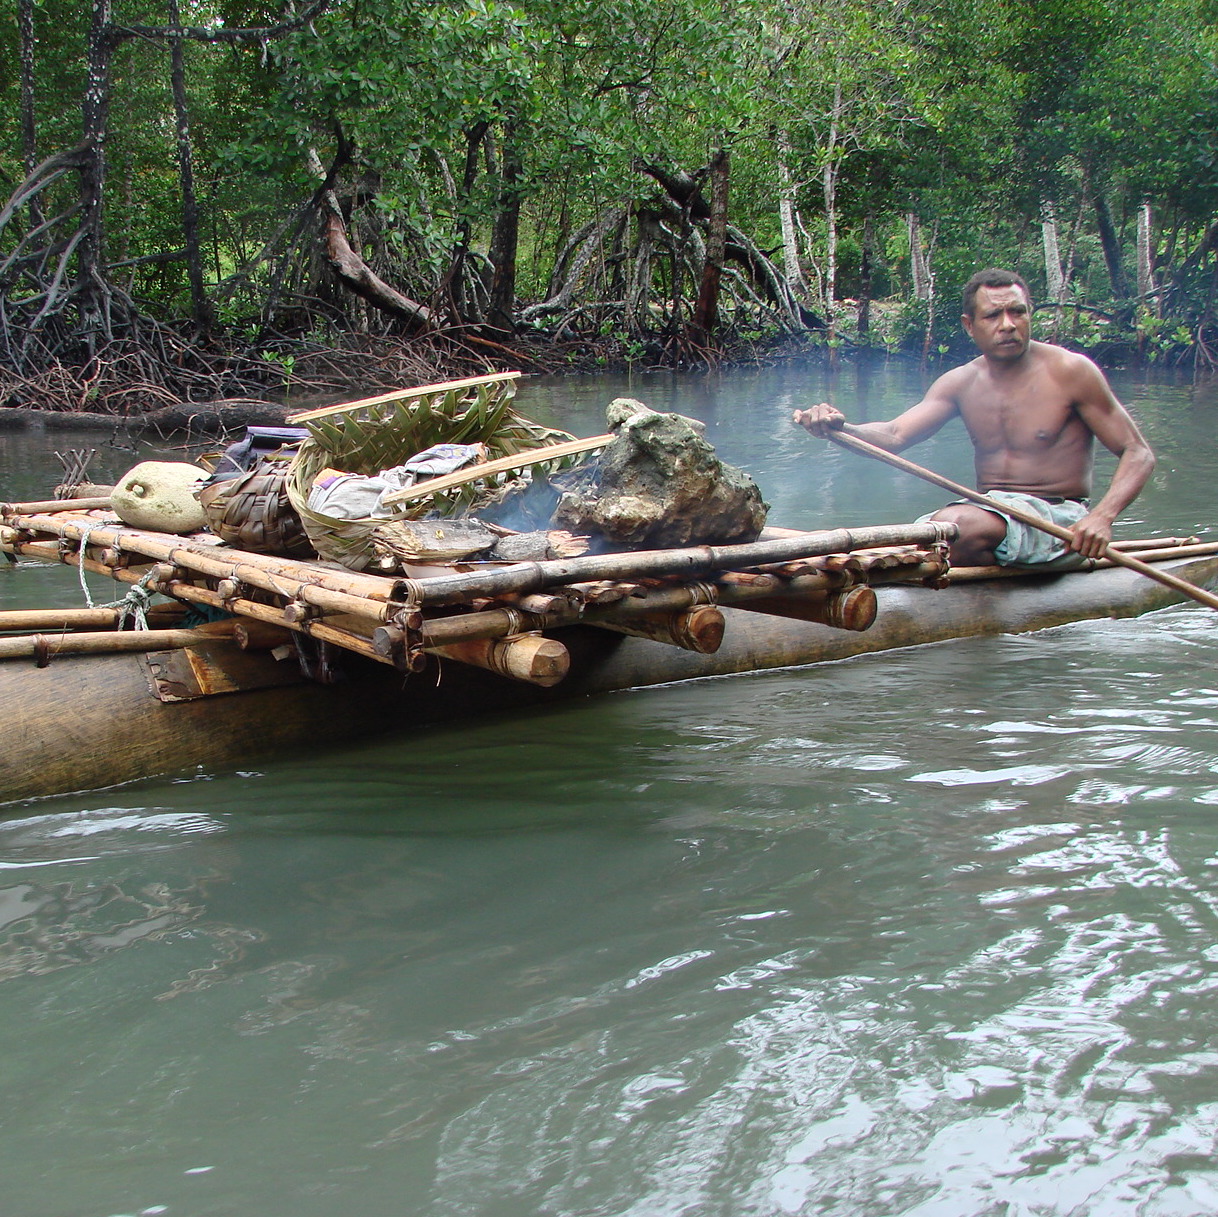 Heading out for a day of fishing, Collingwood Bay, New Guinea Art, Oceanic Art, Tribal Art, South Pacific